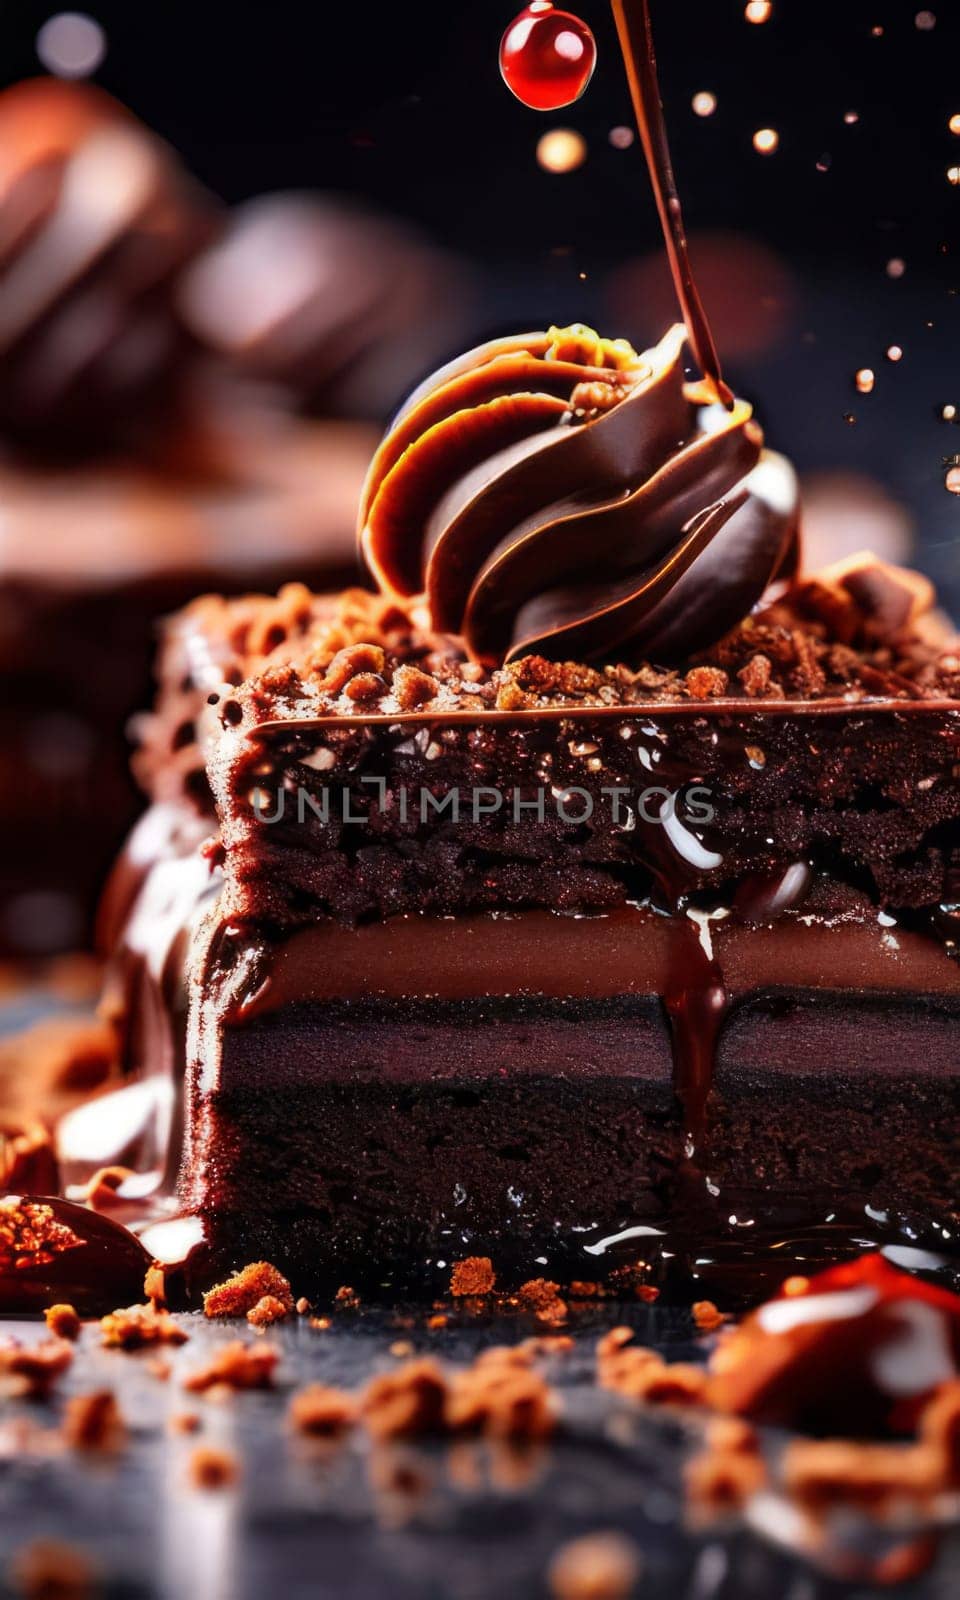 Decadent piece of chocolate cake oozing with rich, velvety chocolate sauce, tempting you with its irresistible sweetness. For recipe websites, cookbooks, dessert advertisements, cafe, culinary blog